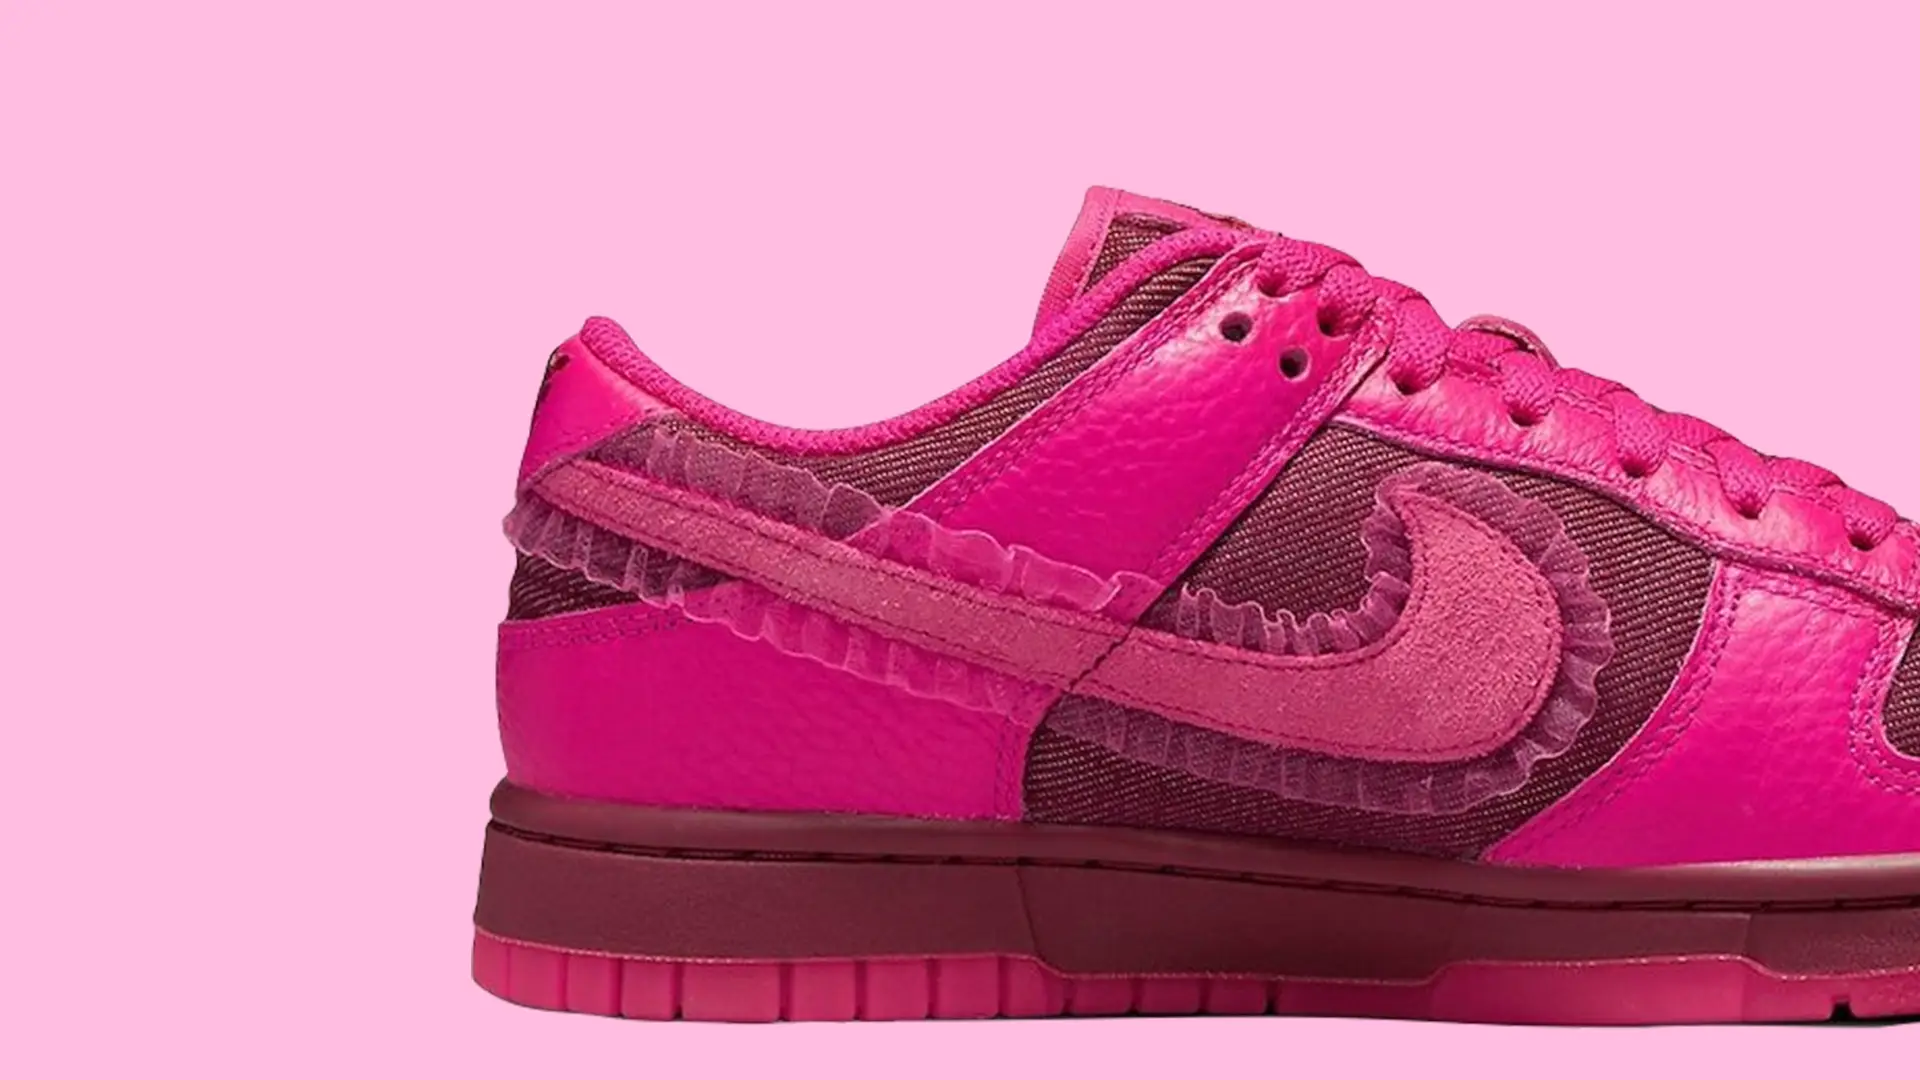 Lacy Details Decorate the Latest Nike Dunk Low 